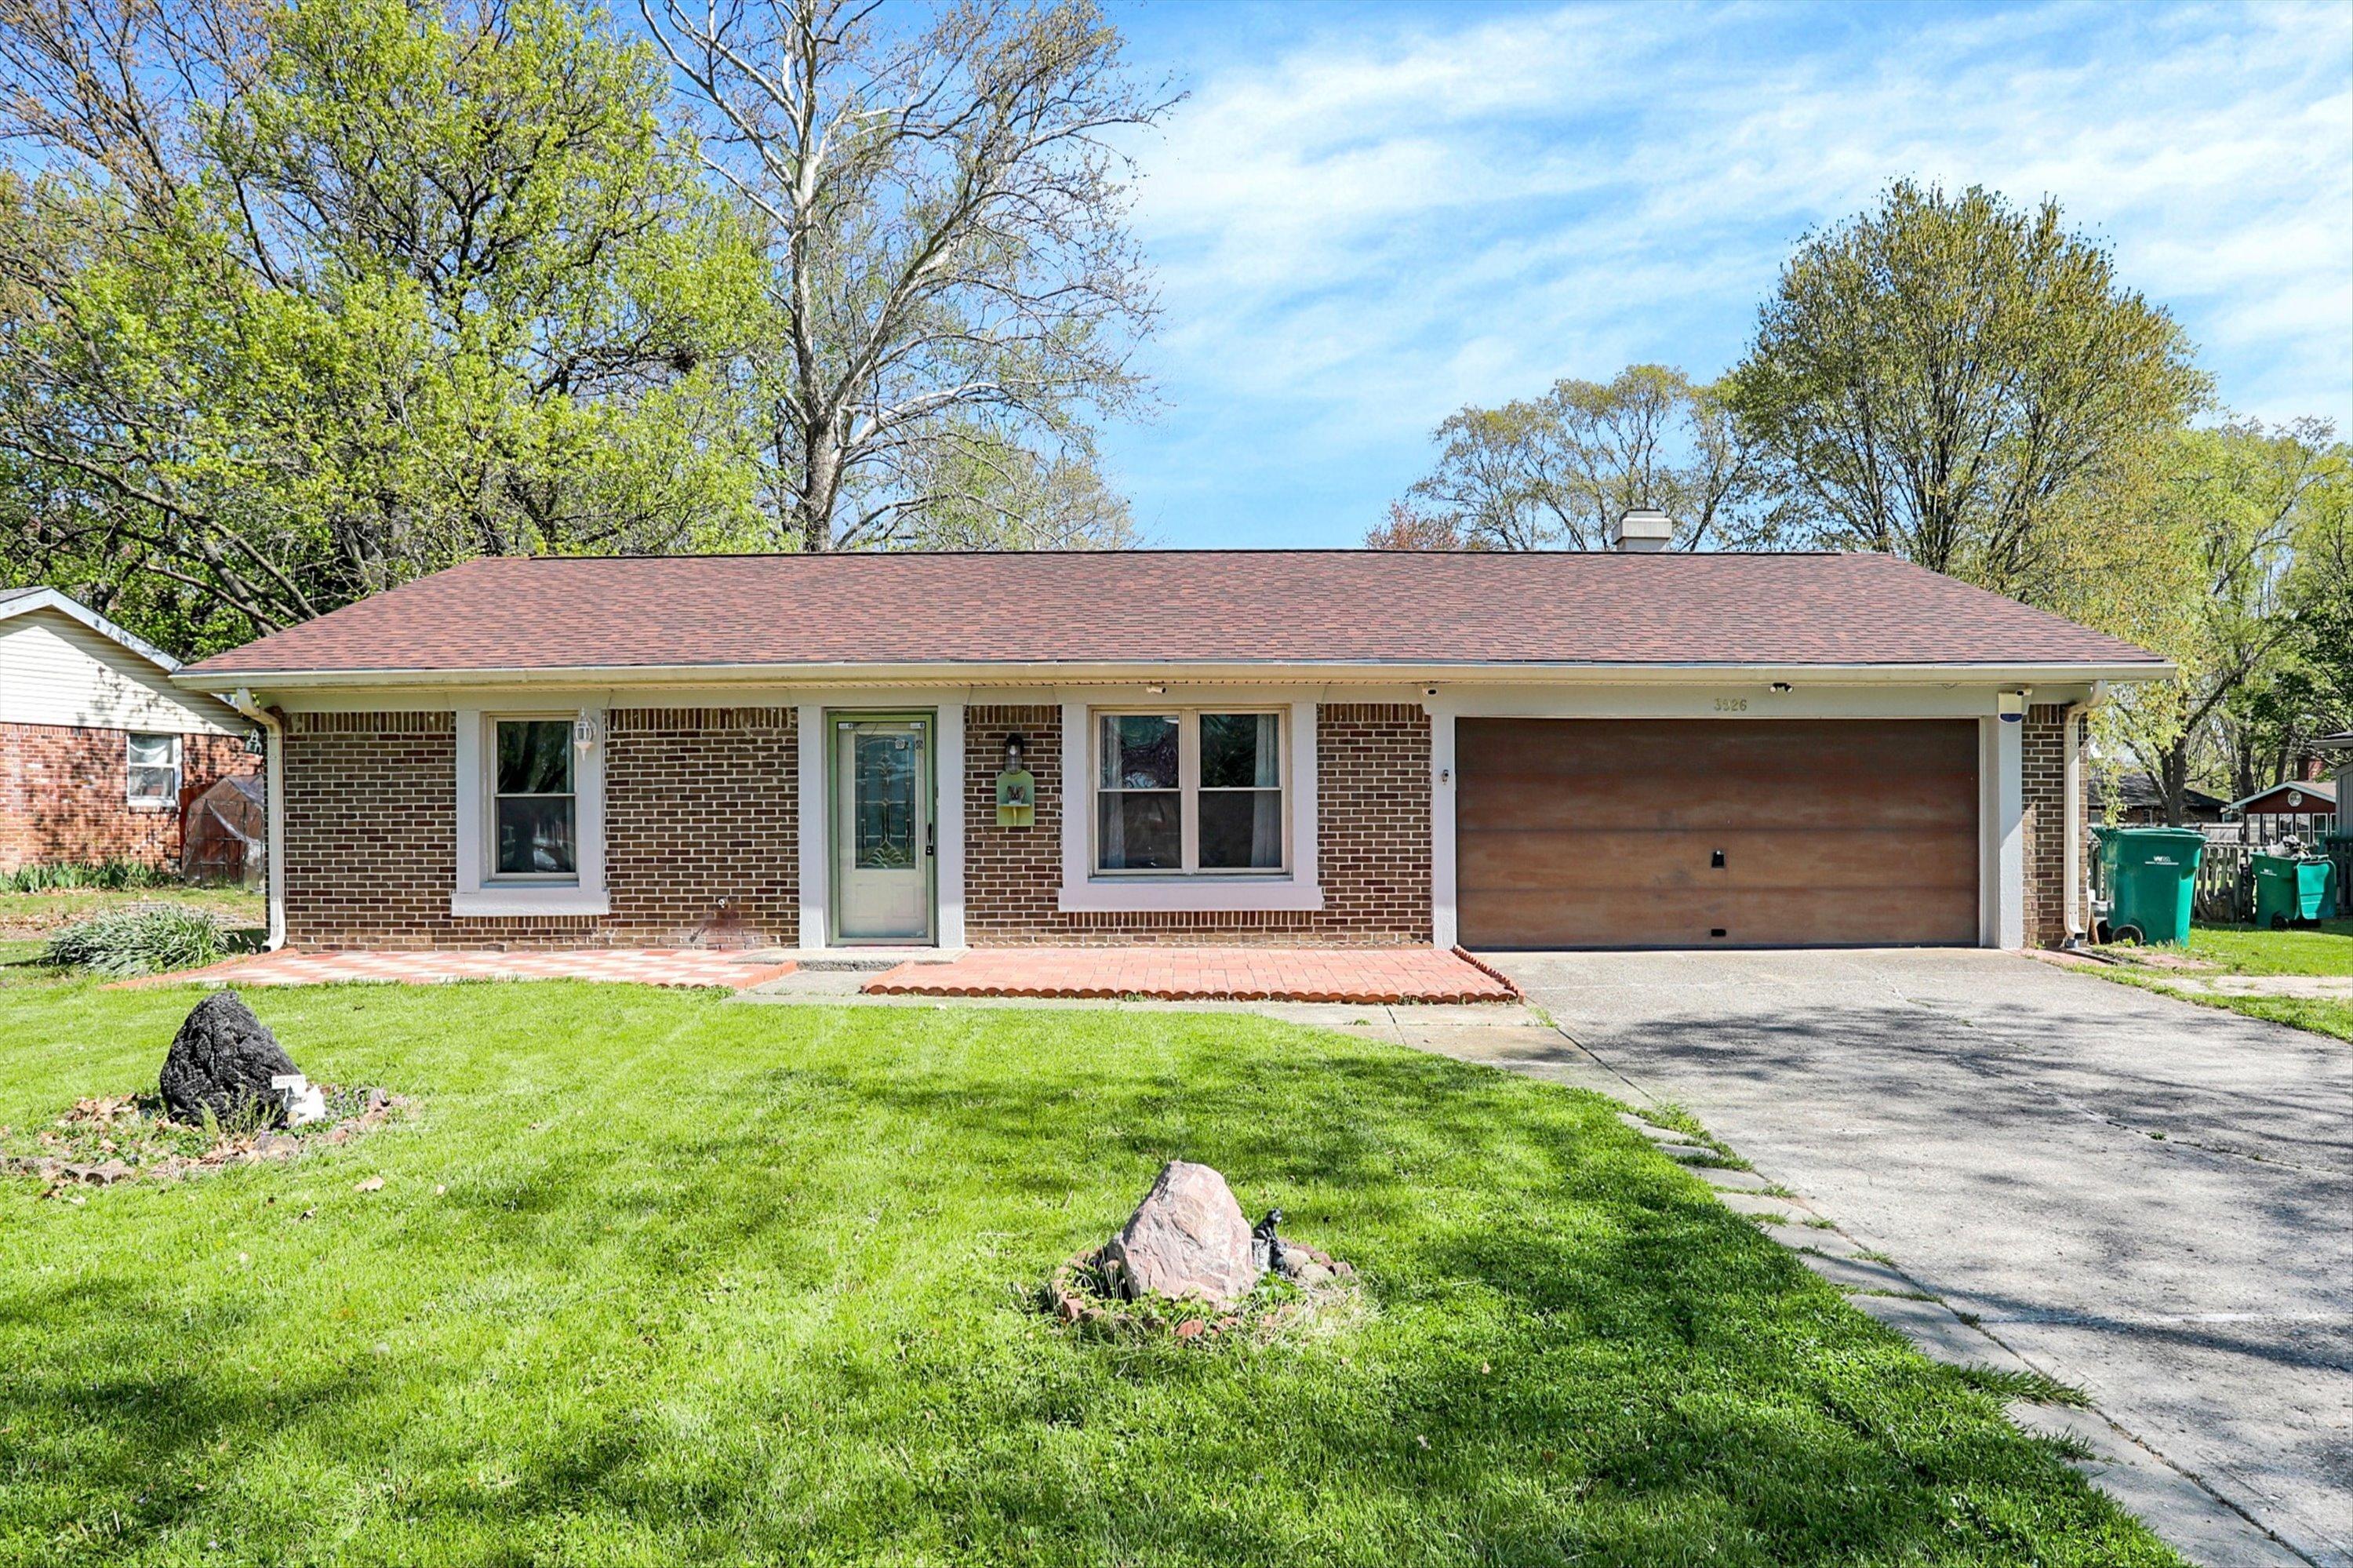 Photo one of 3926 W 80Th St Indianapolis IN 46268 | MLS 21975143